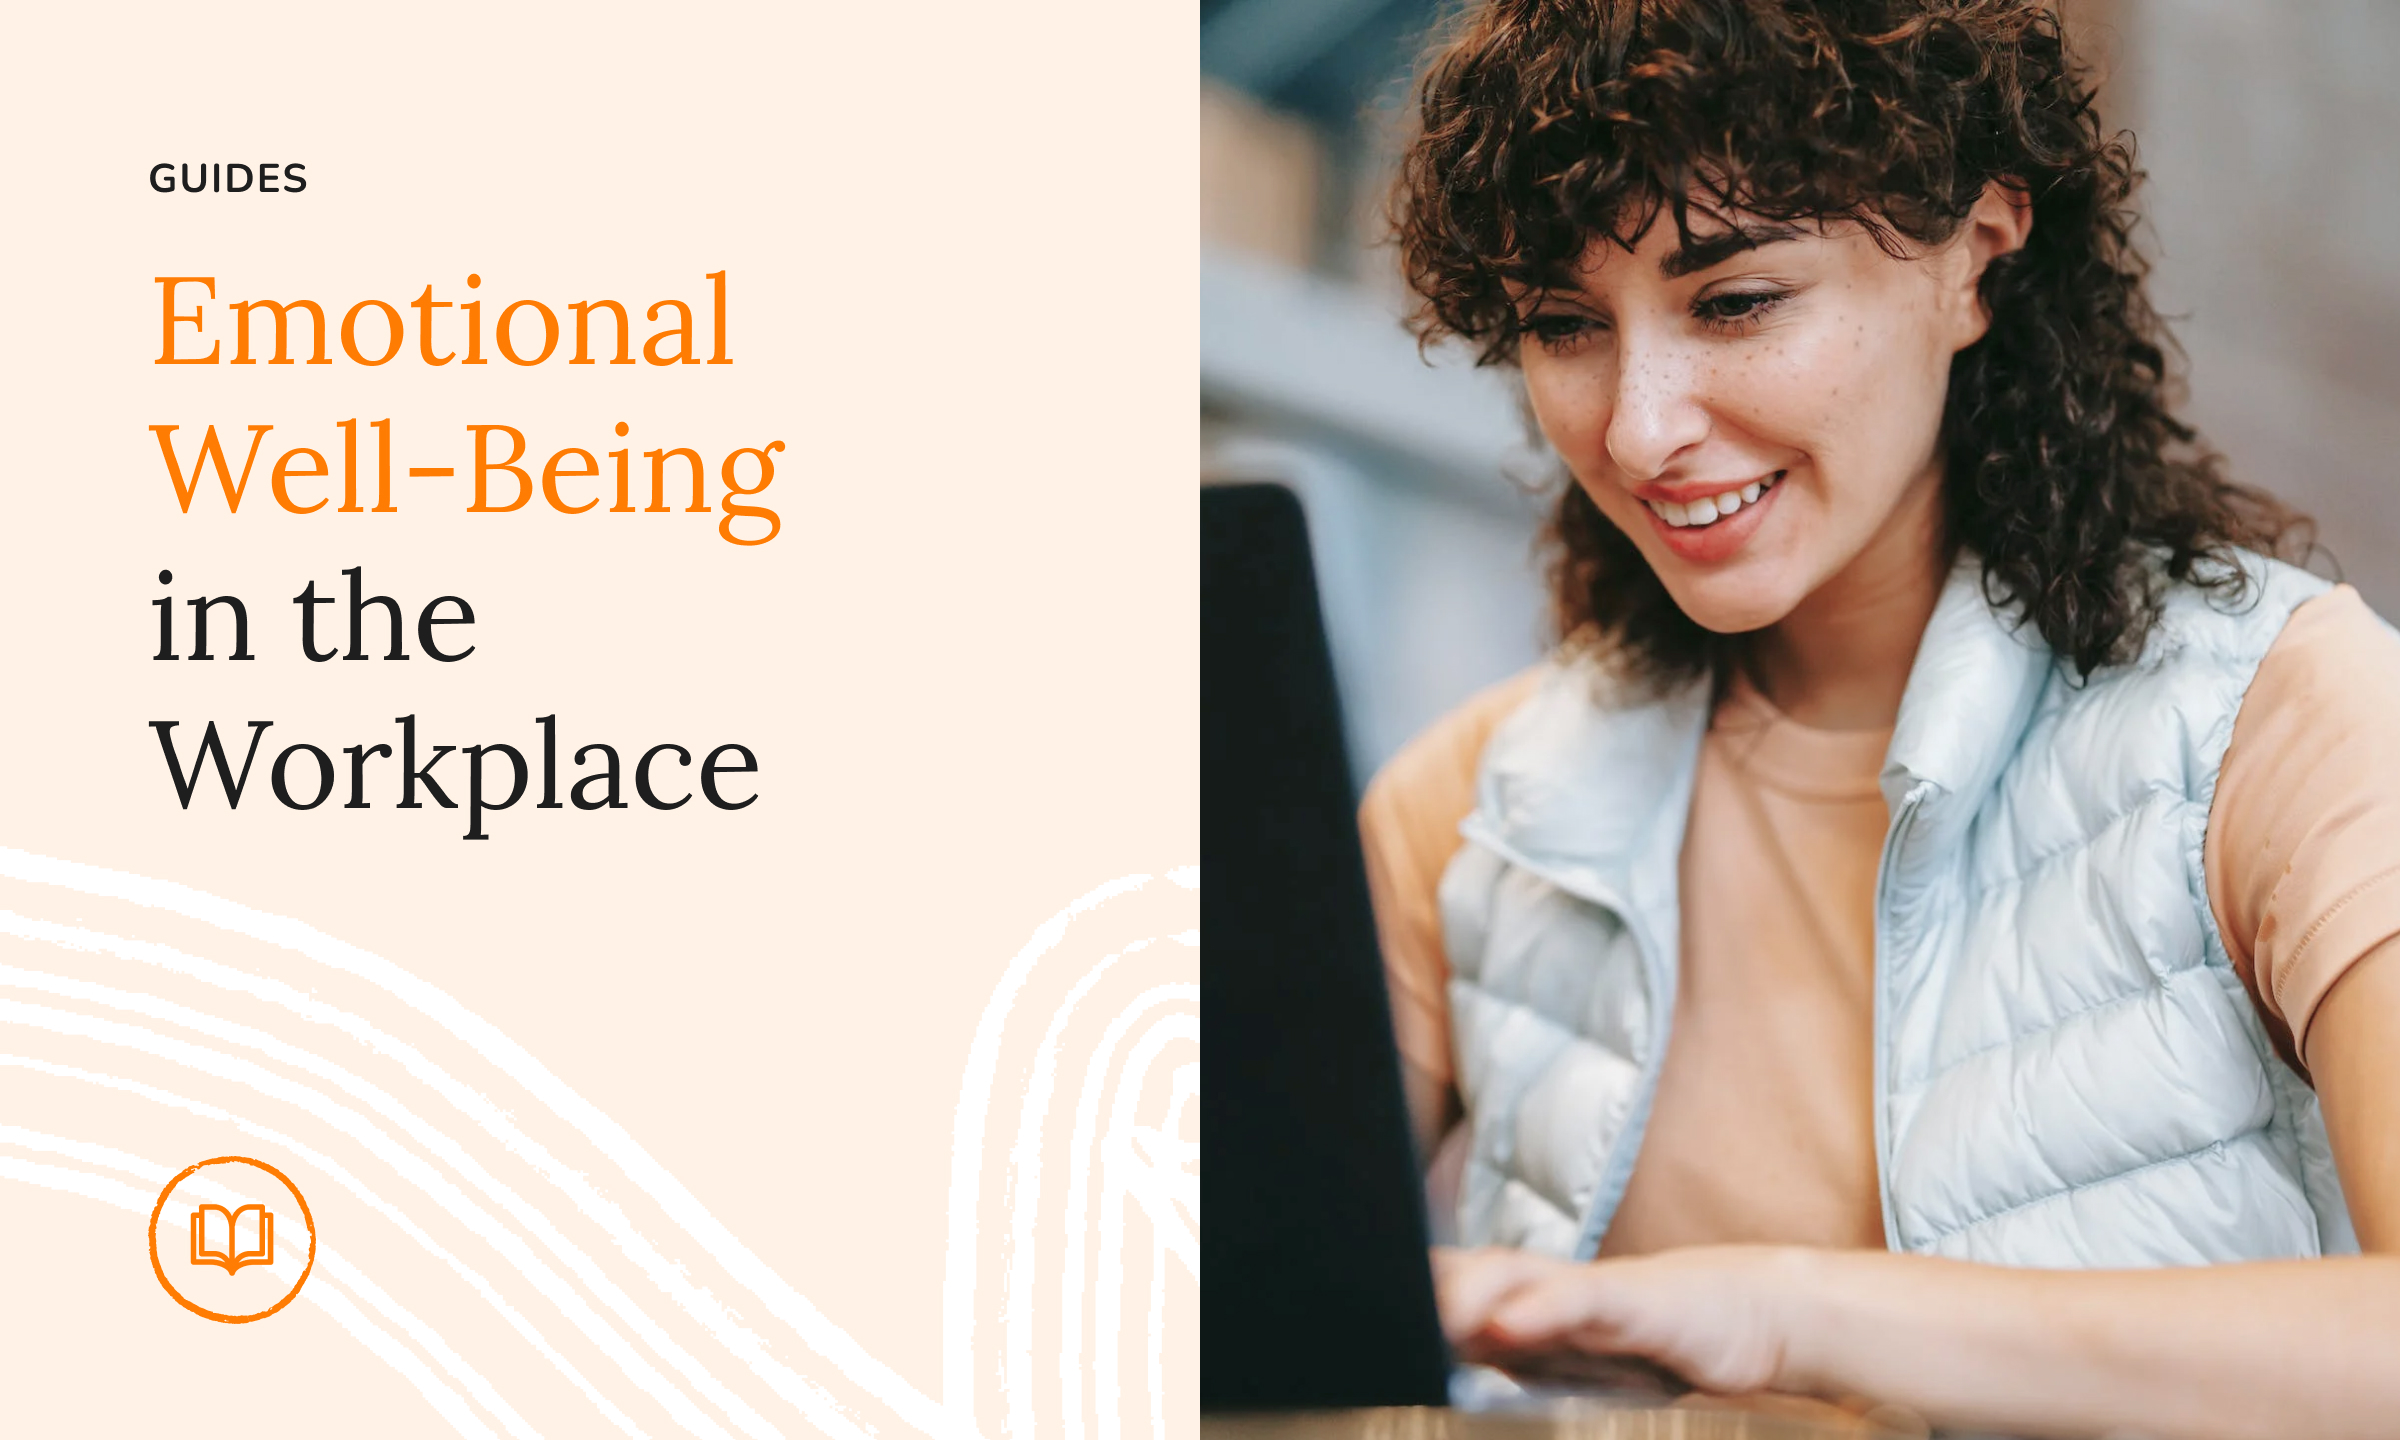 Emotional Well-Being in the Workplace